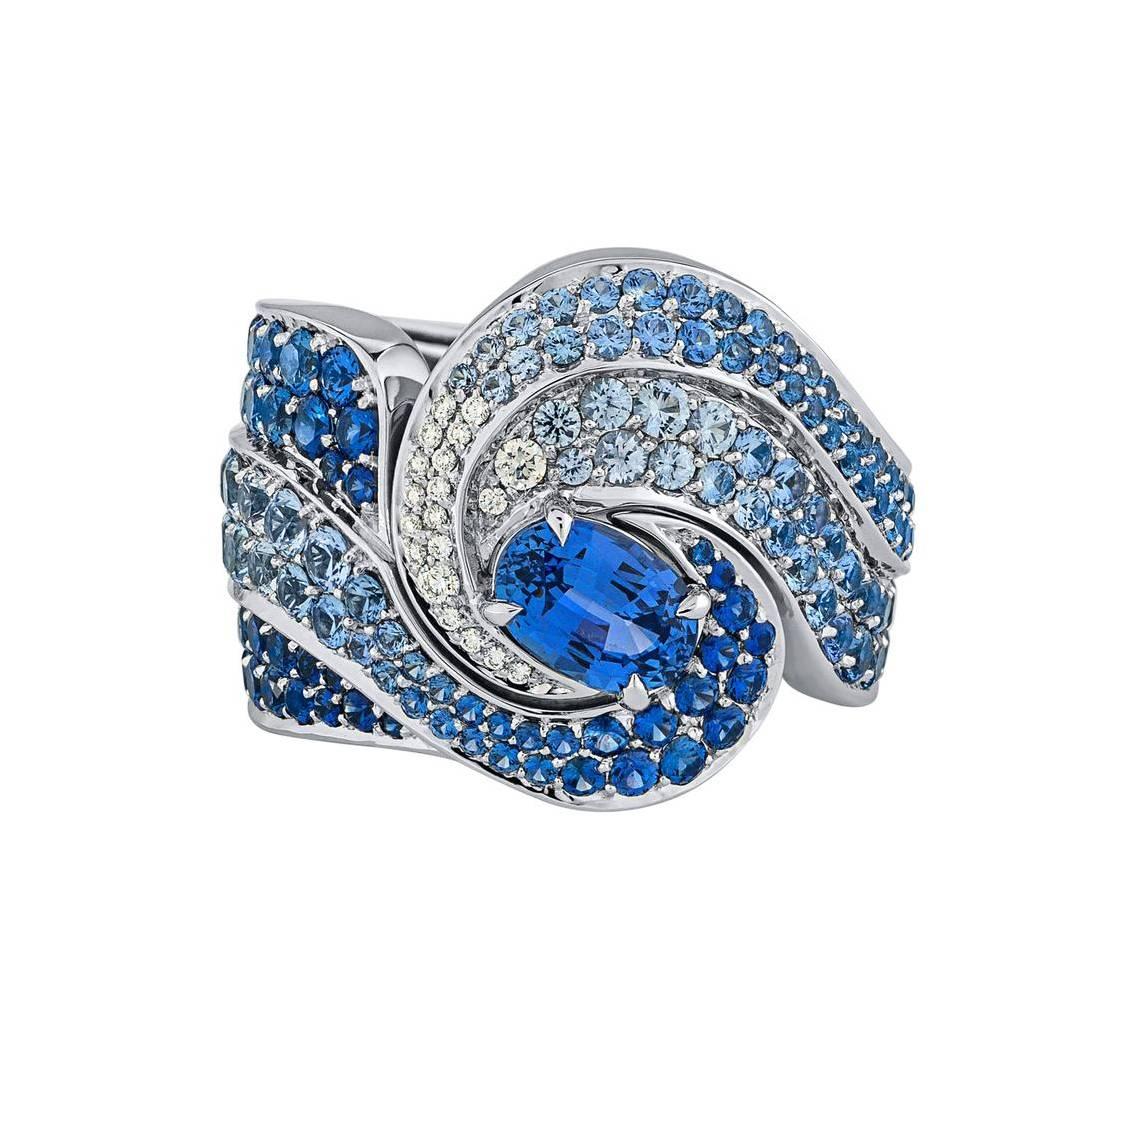 White Gold, White Diamond and Blue Sapphire Cocktail Ring